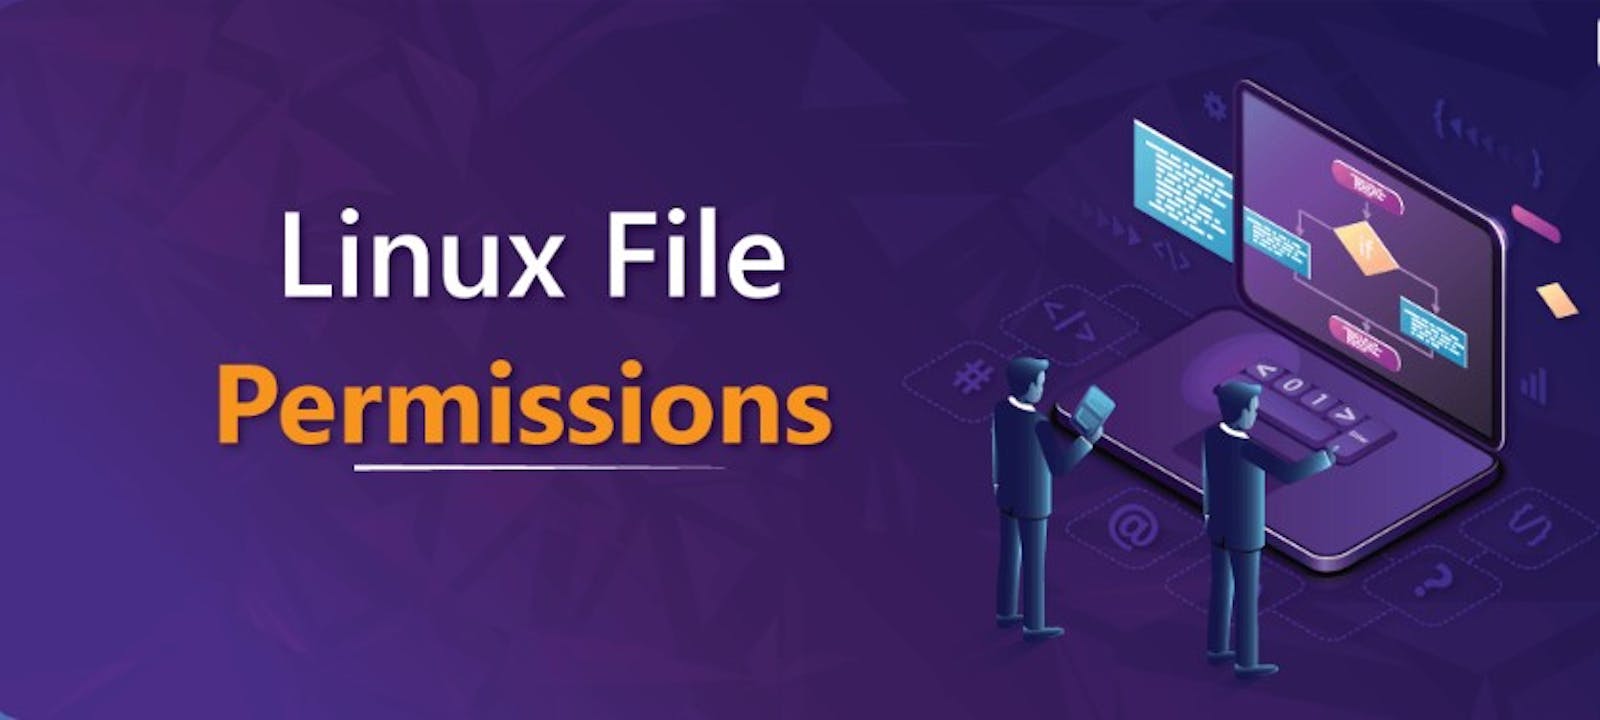 Day 6: Understanding Linux File Permissions and Access Control Lists